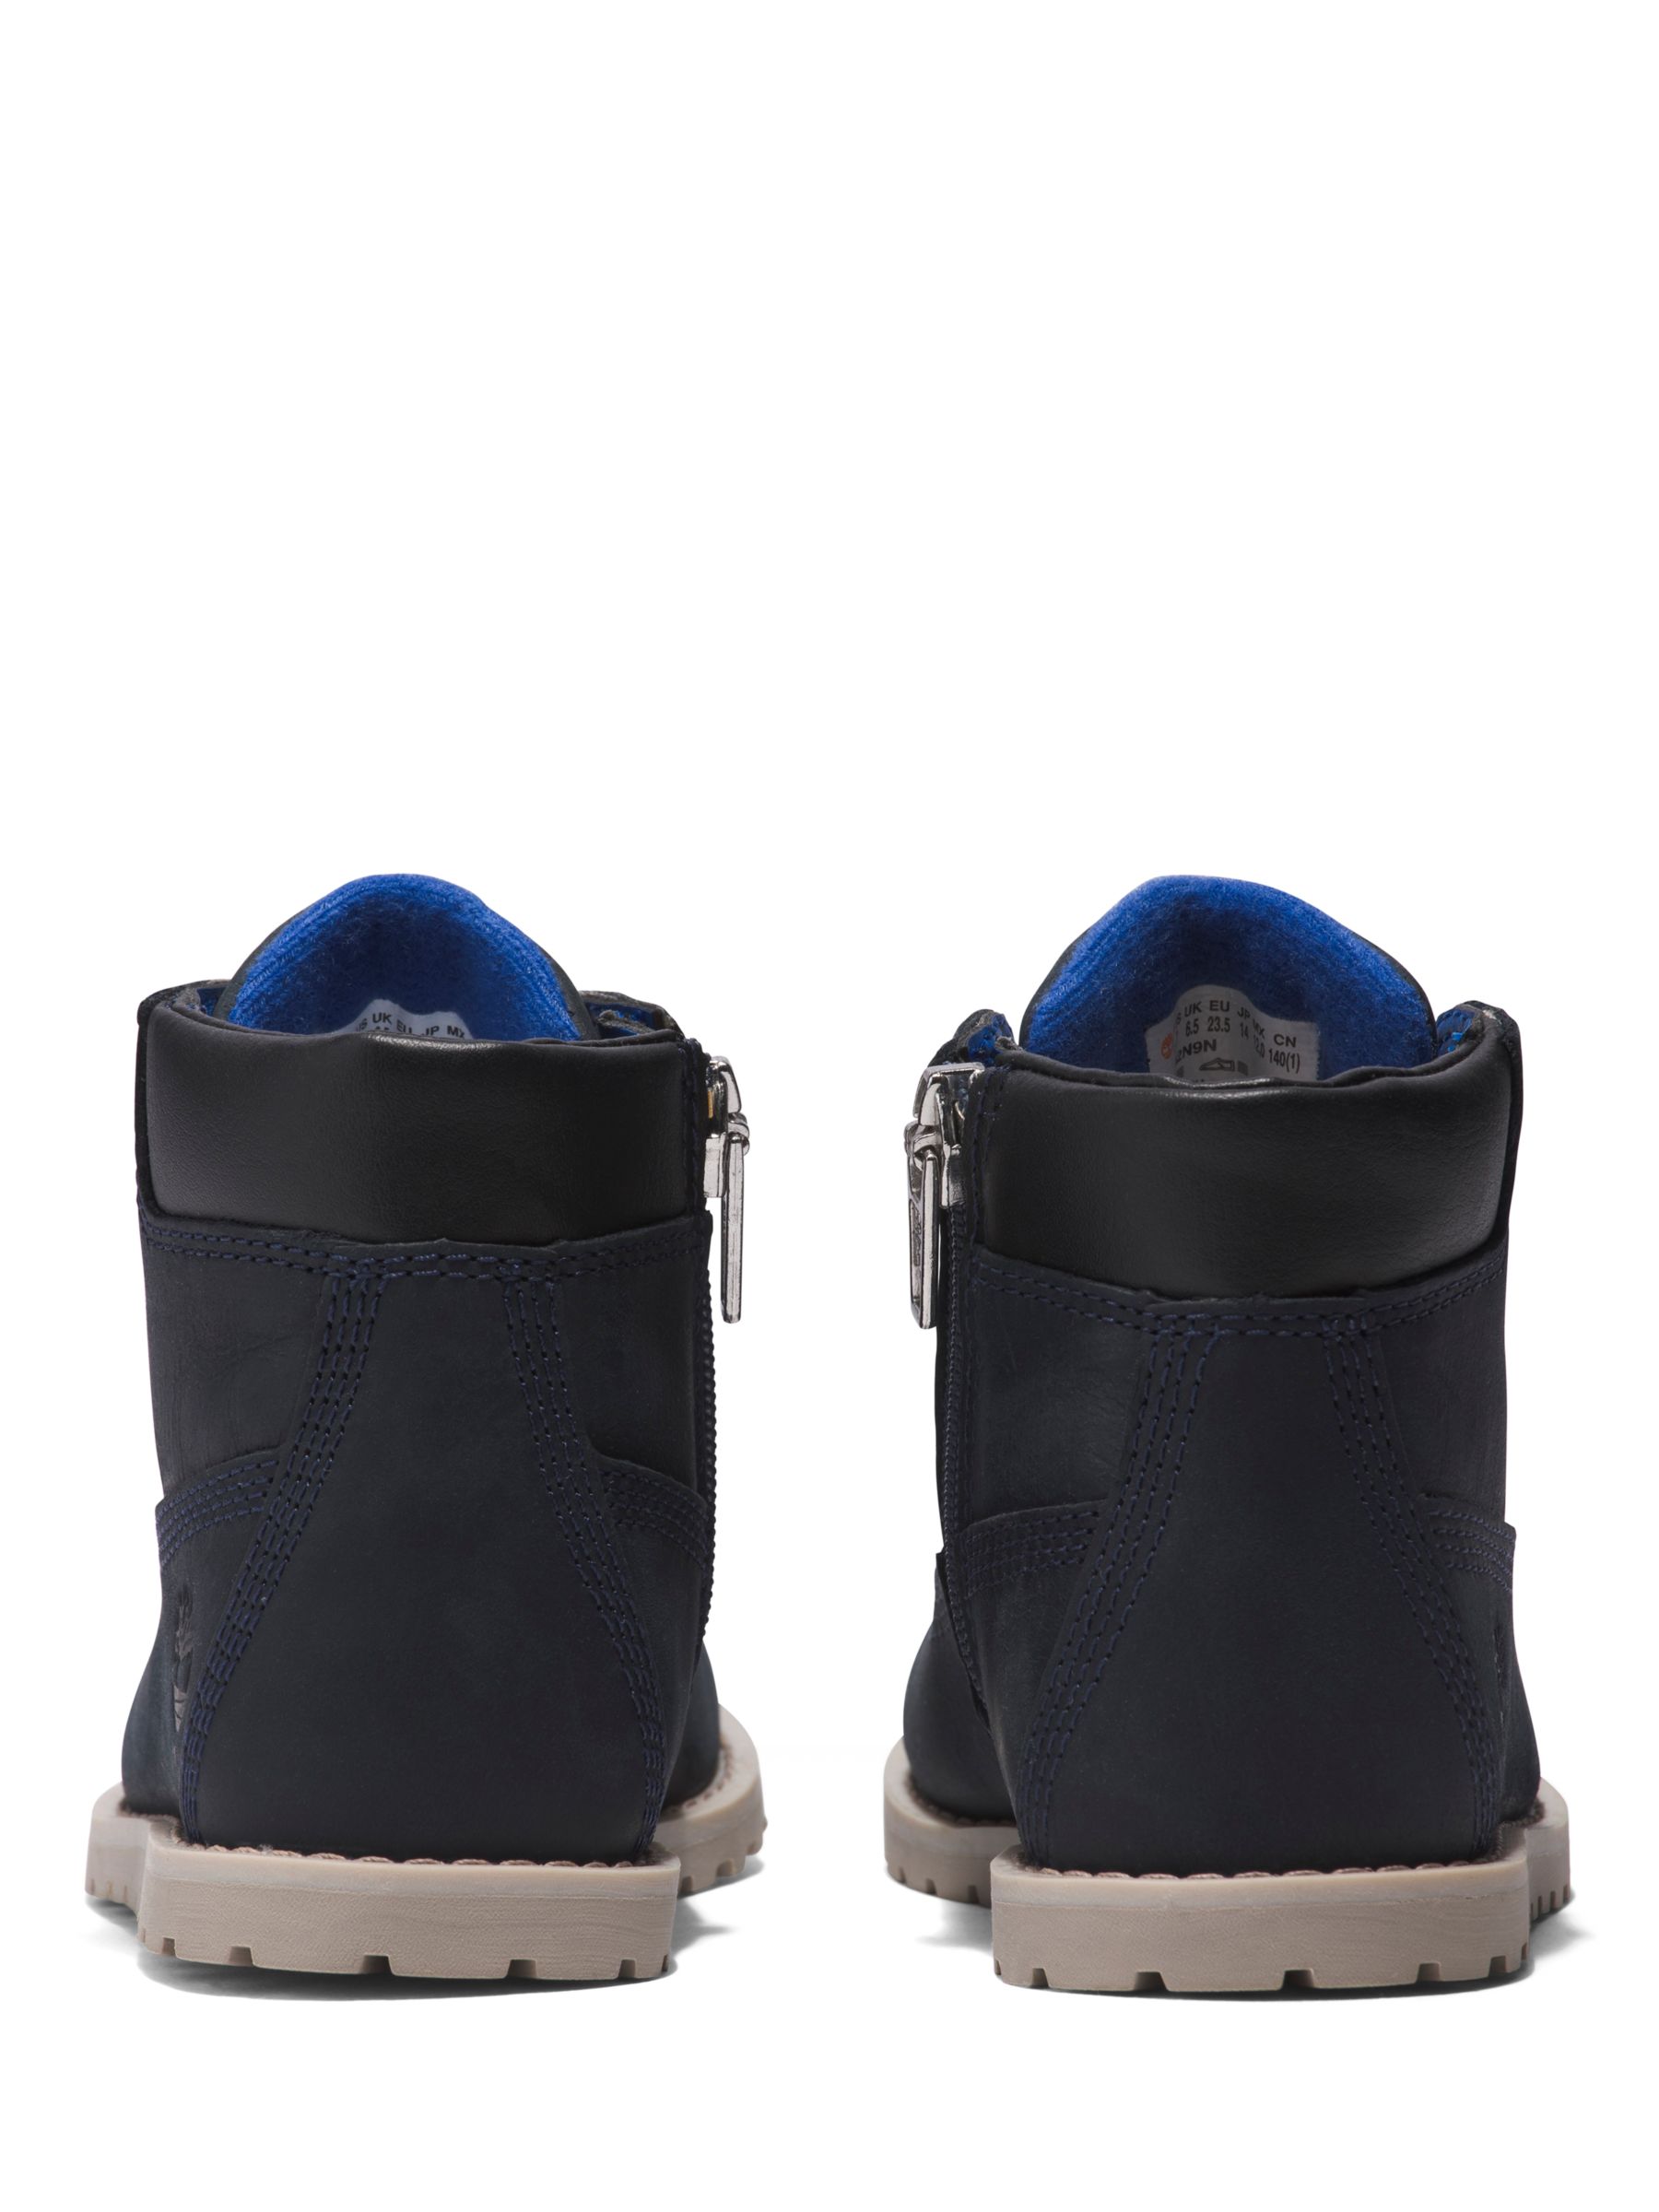 Timberland Kids' Pokey Pine Ankle Boots, Navy, 21